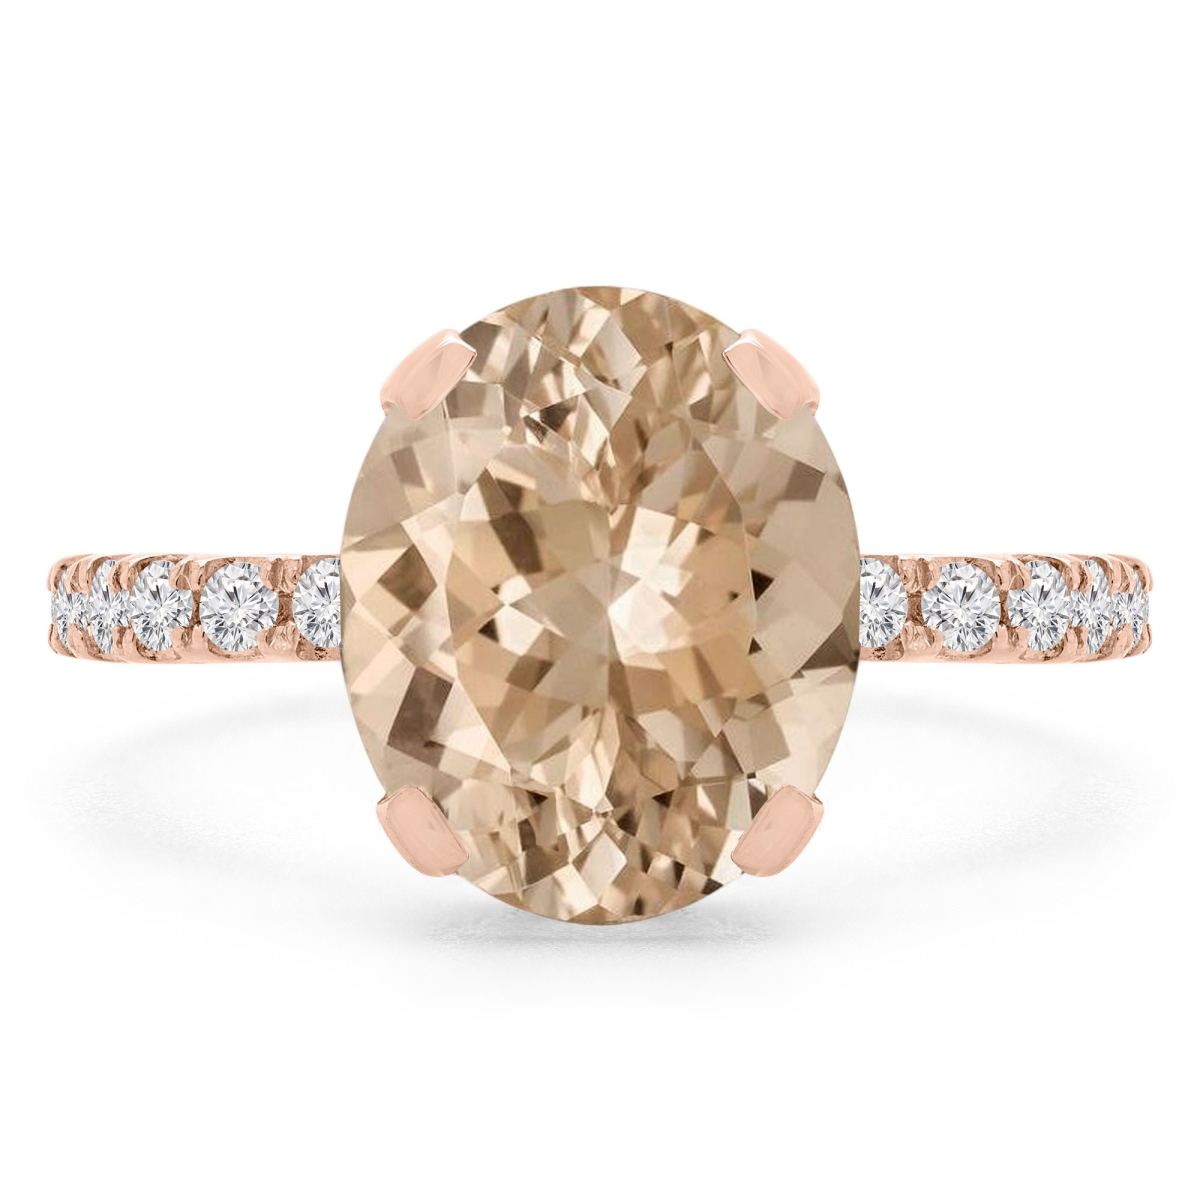 Picture of Majesty Diamonds MD190407-5.25 3.4 CTW Oval Pink Morganite Under Halo Engagement Ring in 14K Rose Gold - Size 5.25